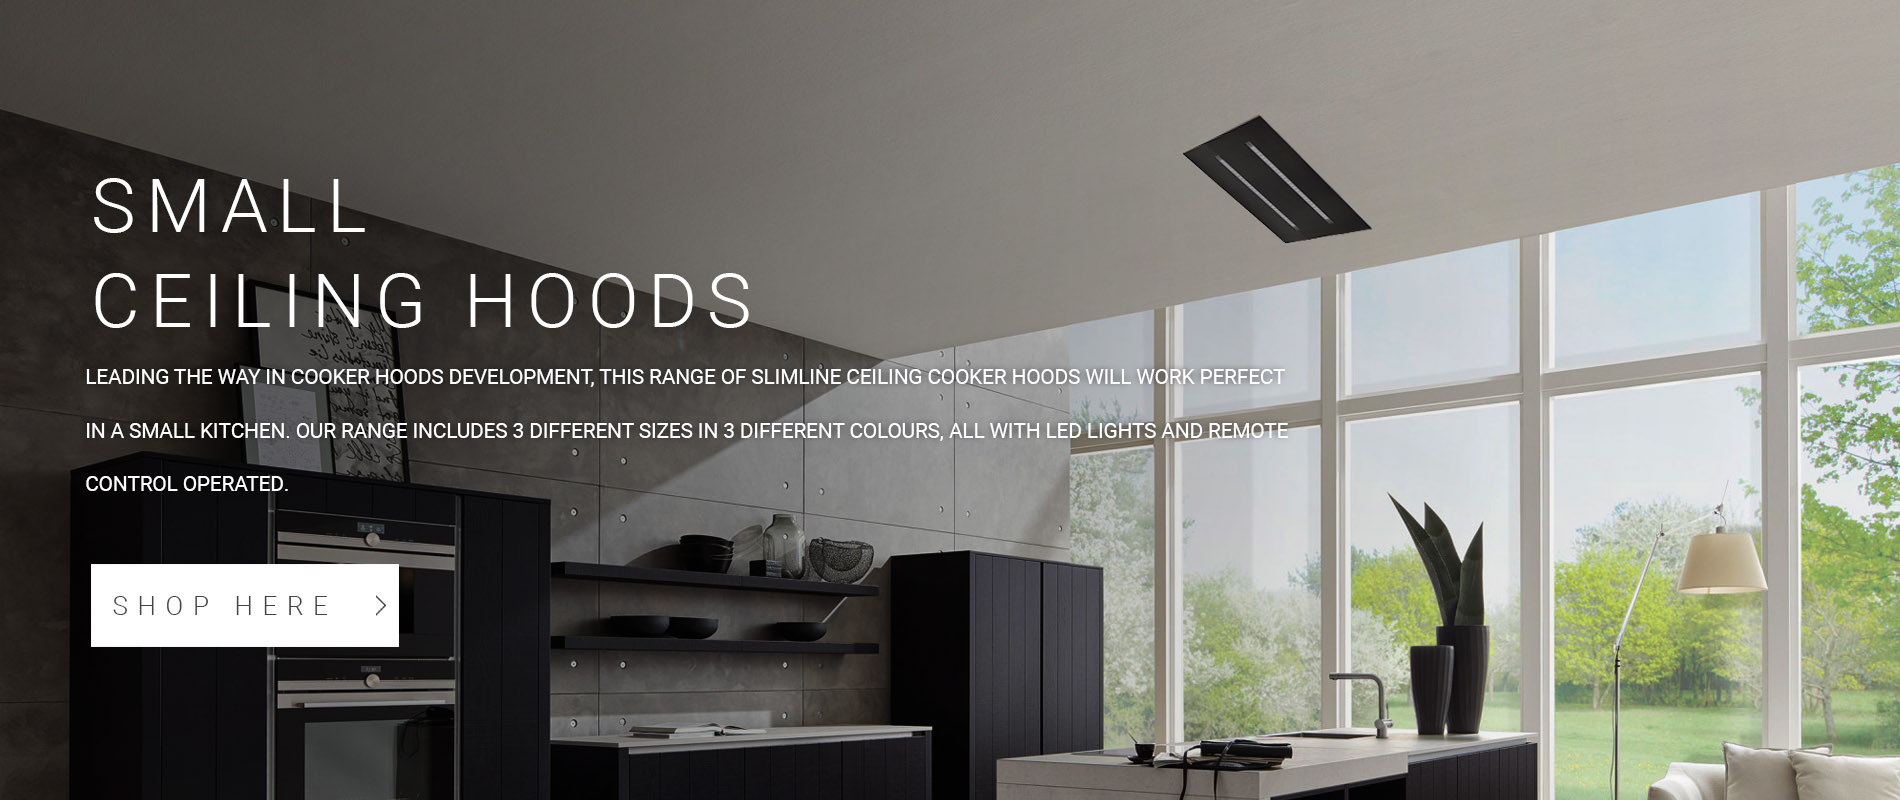 Small Ceiling Cooker Hoods